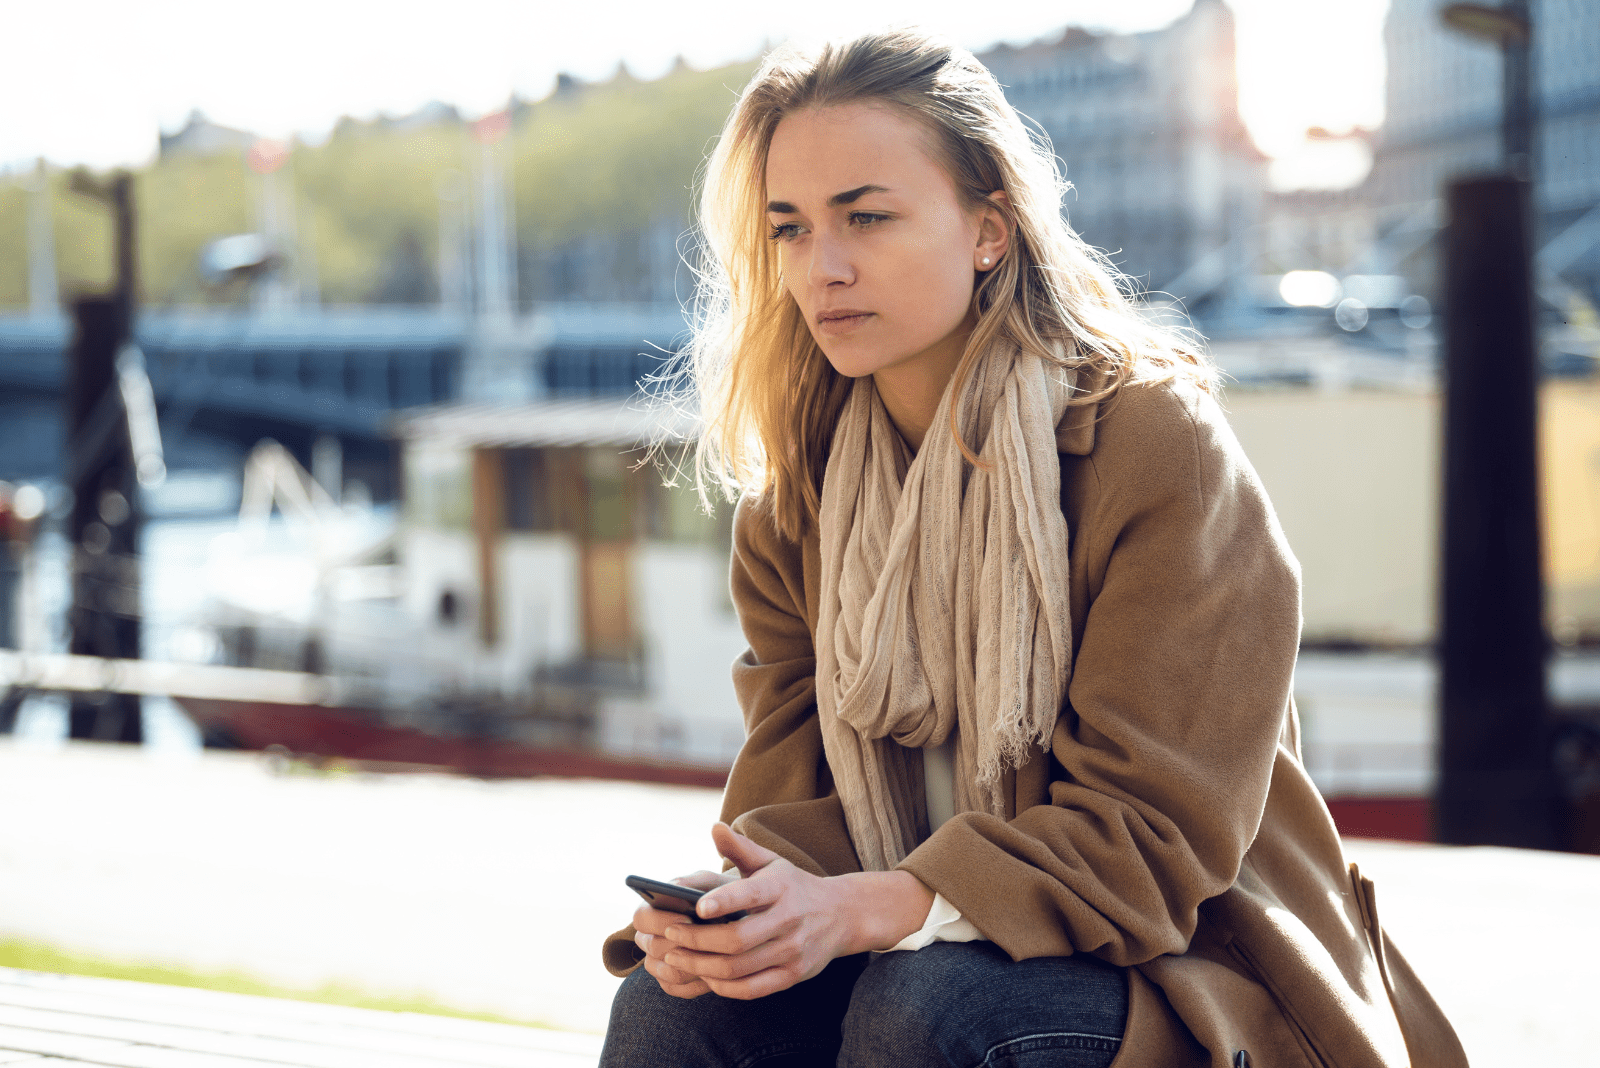 pensive woman sits and holds a mobile phone in her hand